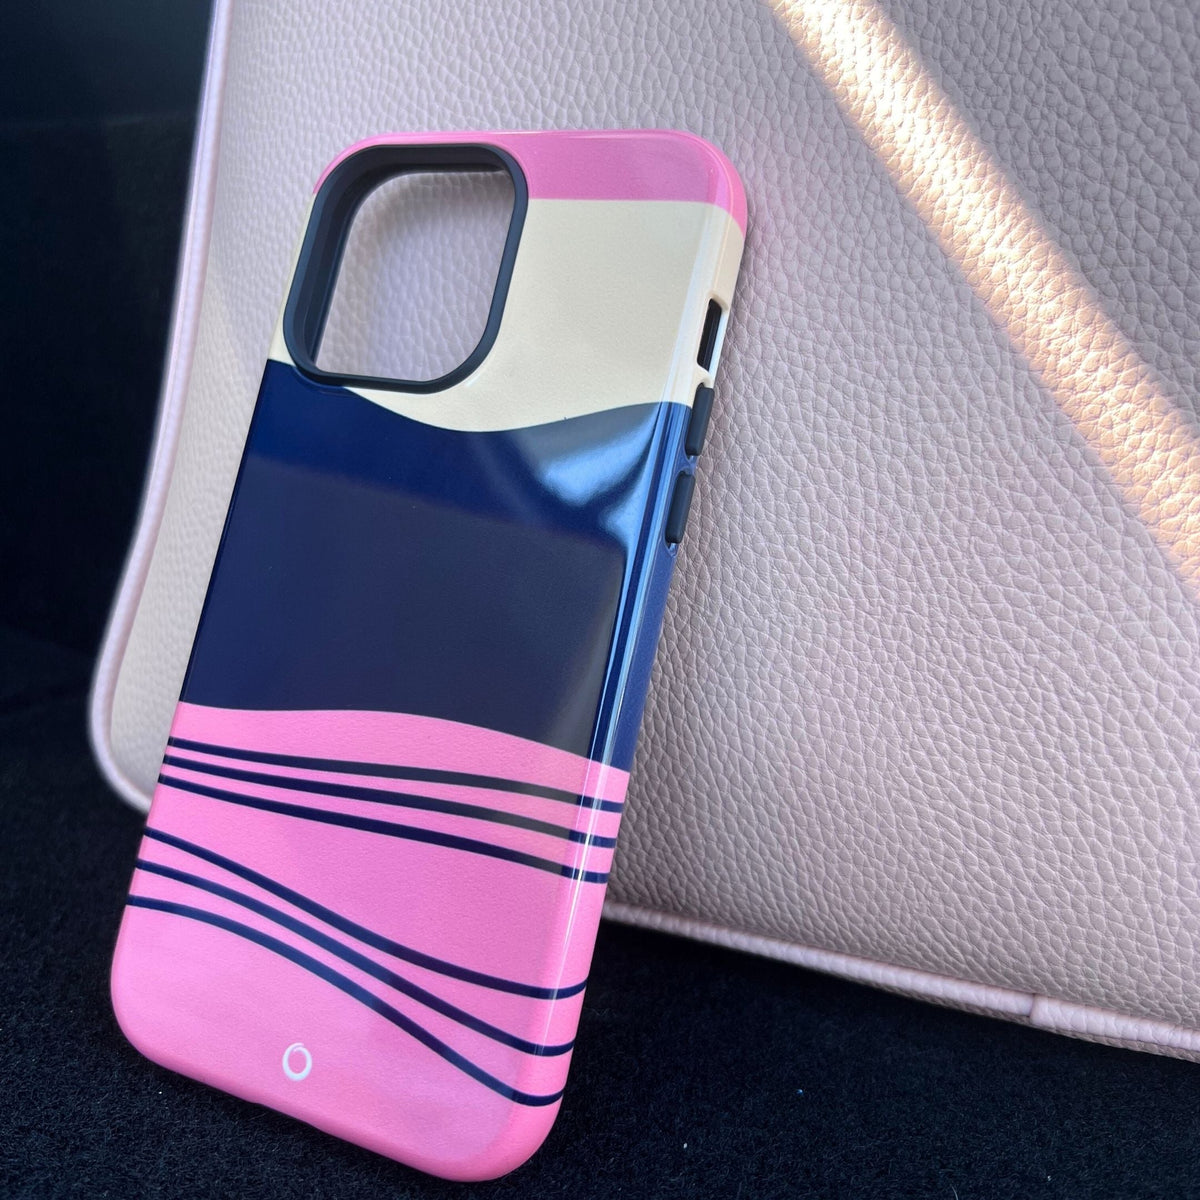 Blushing Hues iPhone Case - Select a Device